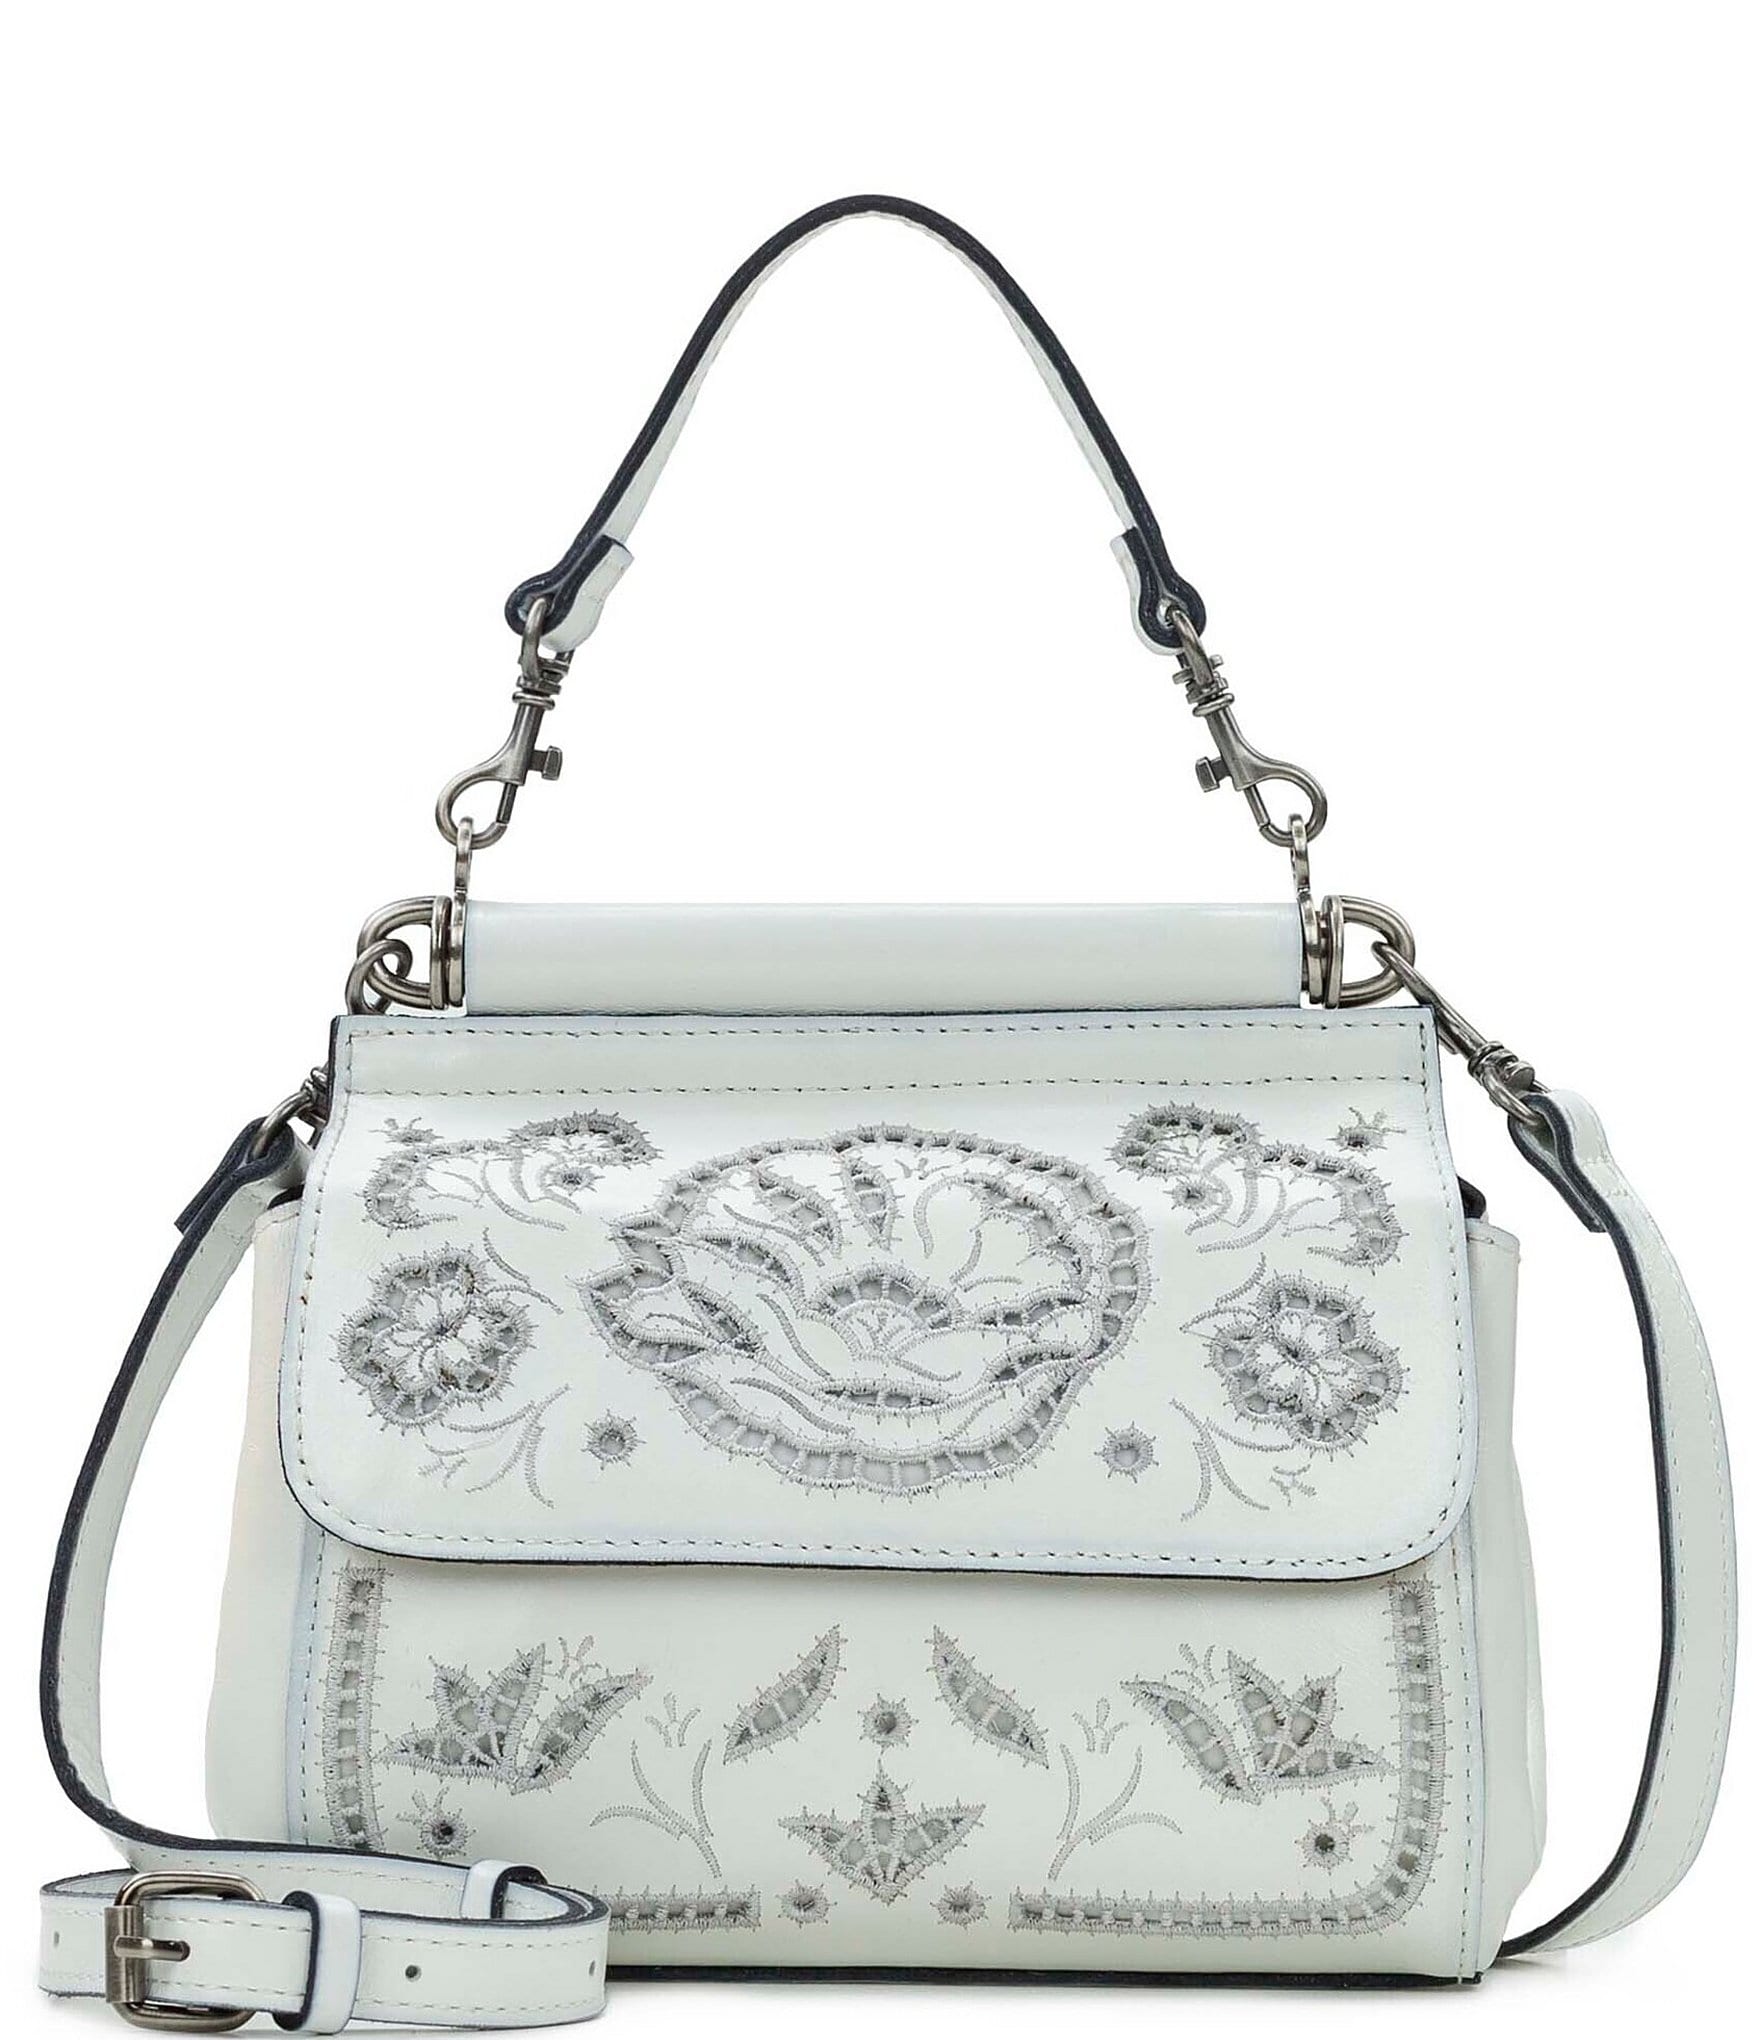 Patricia Nash Annabelle Top Handle Leather Embroidered Floral Crossbody ...